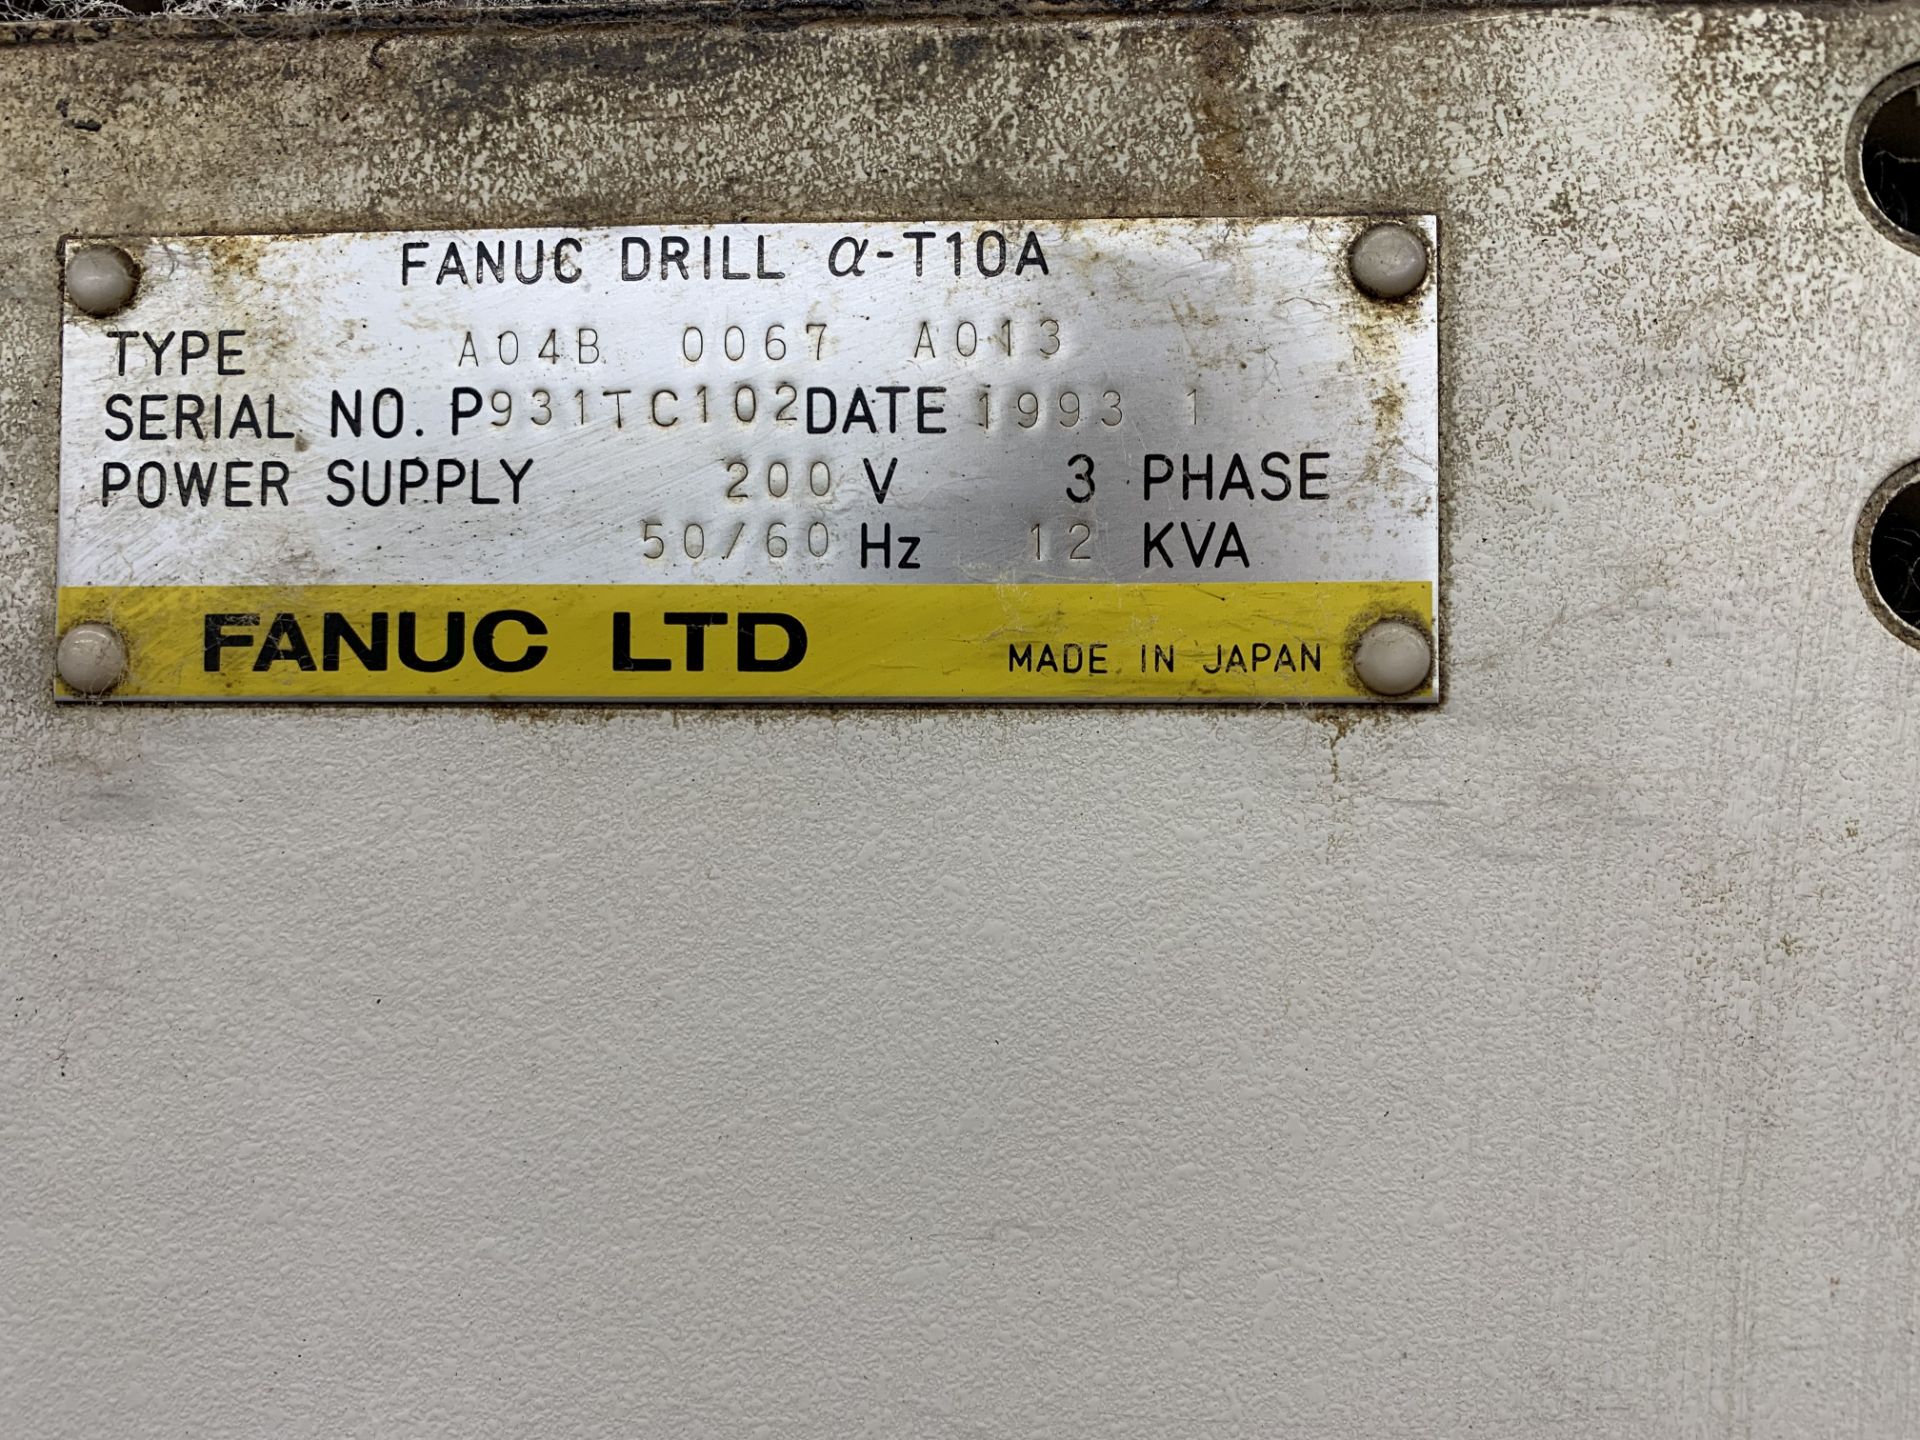 FANUC MODEL ROBODRILL ALPHA T10A CNC DRILL AND TAPPING CENTER; S/N P931TC102, 19,5" X-AXIS, 11.8" - Image 7 of 7